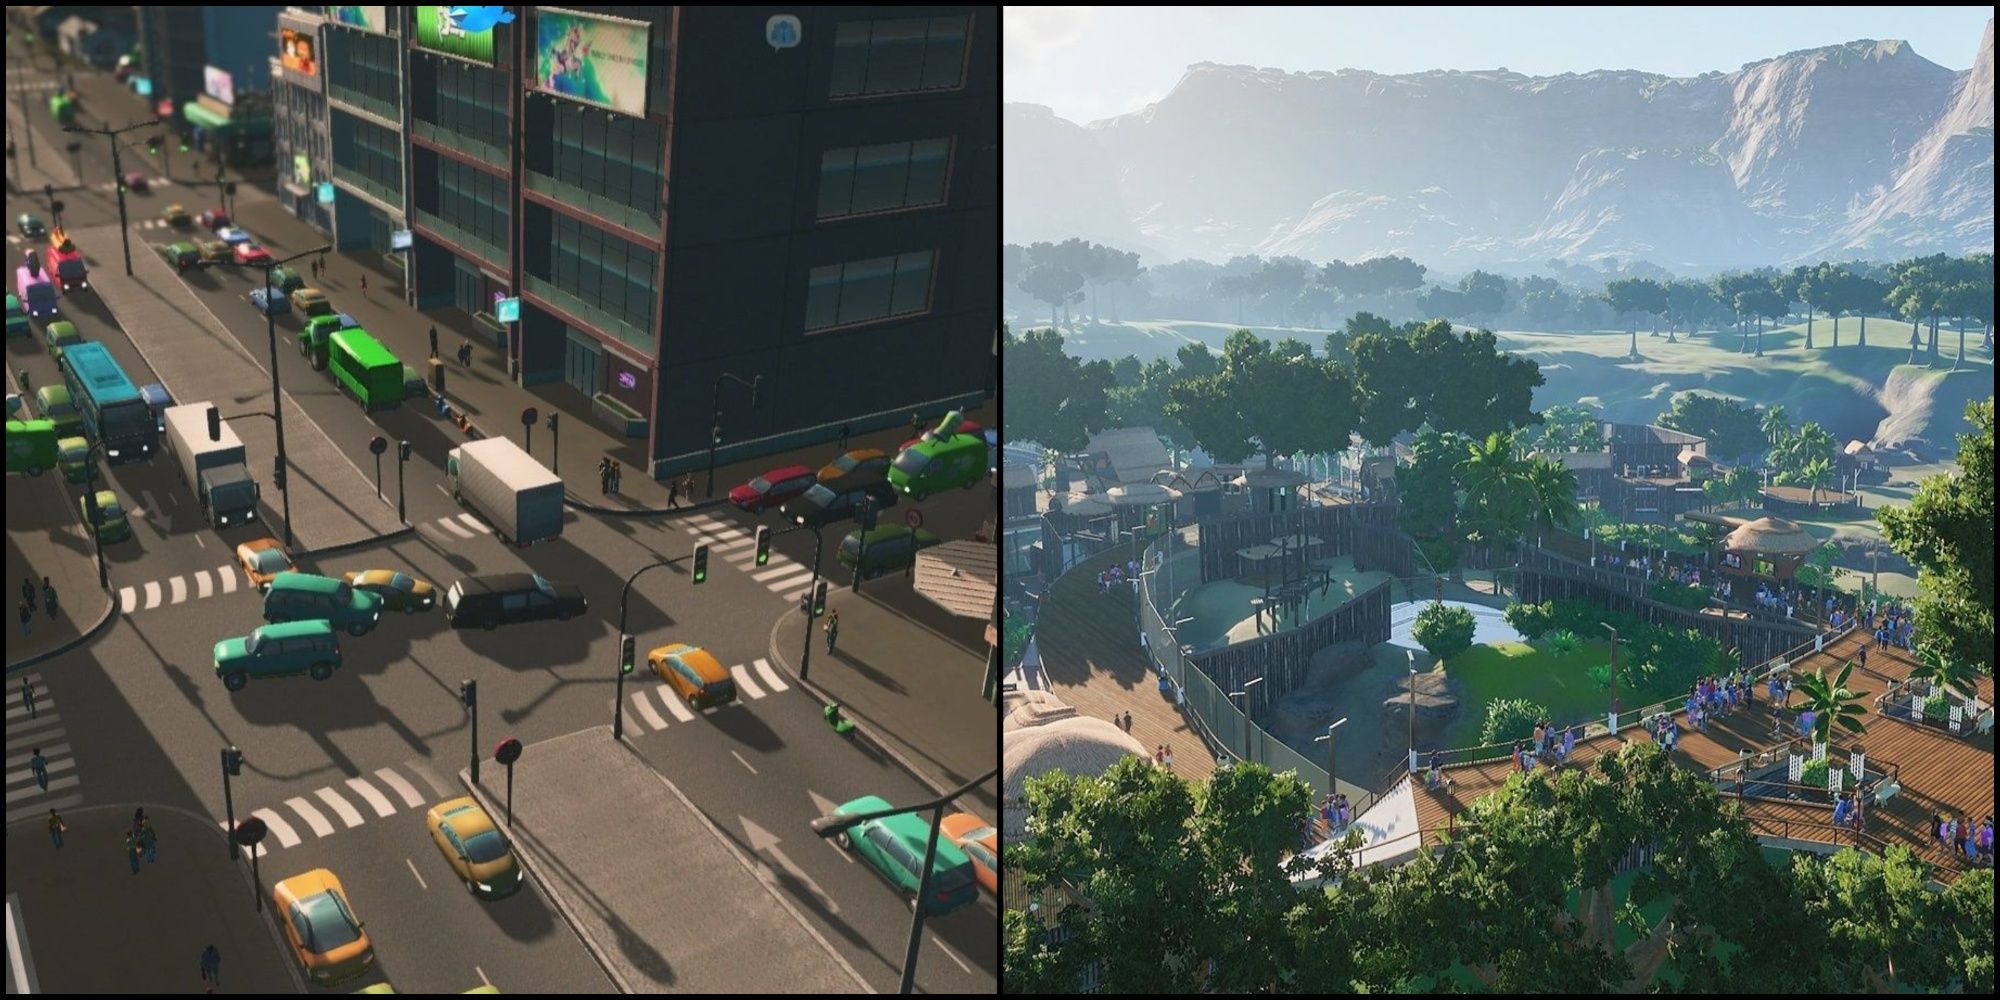 The Most Realistic Building Games, Cities: Skylines and Planet Zoo